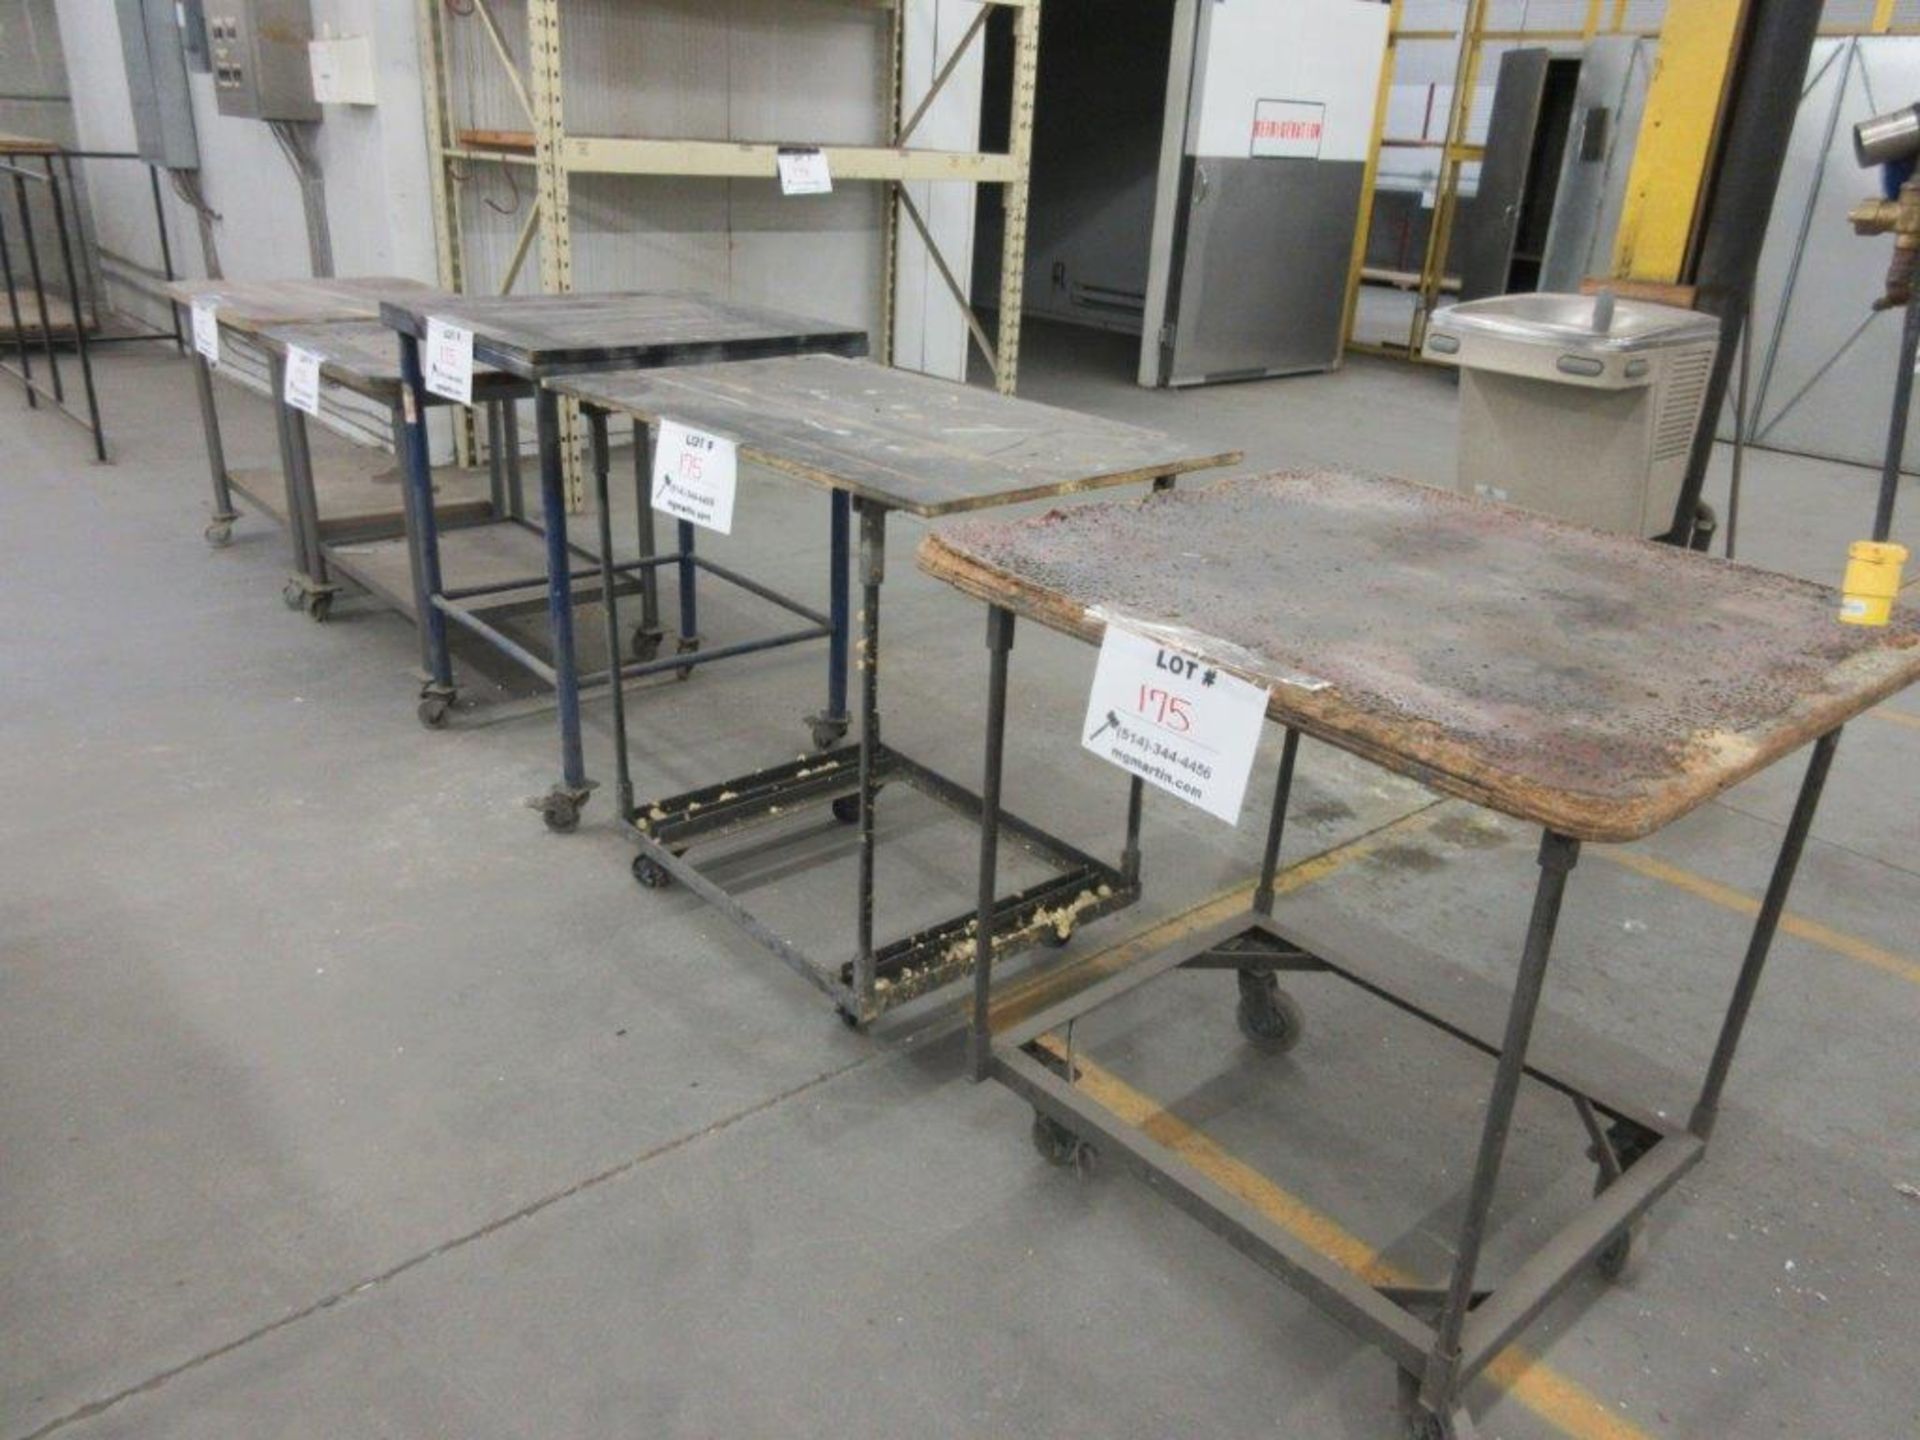 Assorted tables on wheels various sizes 30"w x 30"d aprox